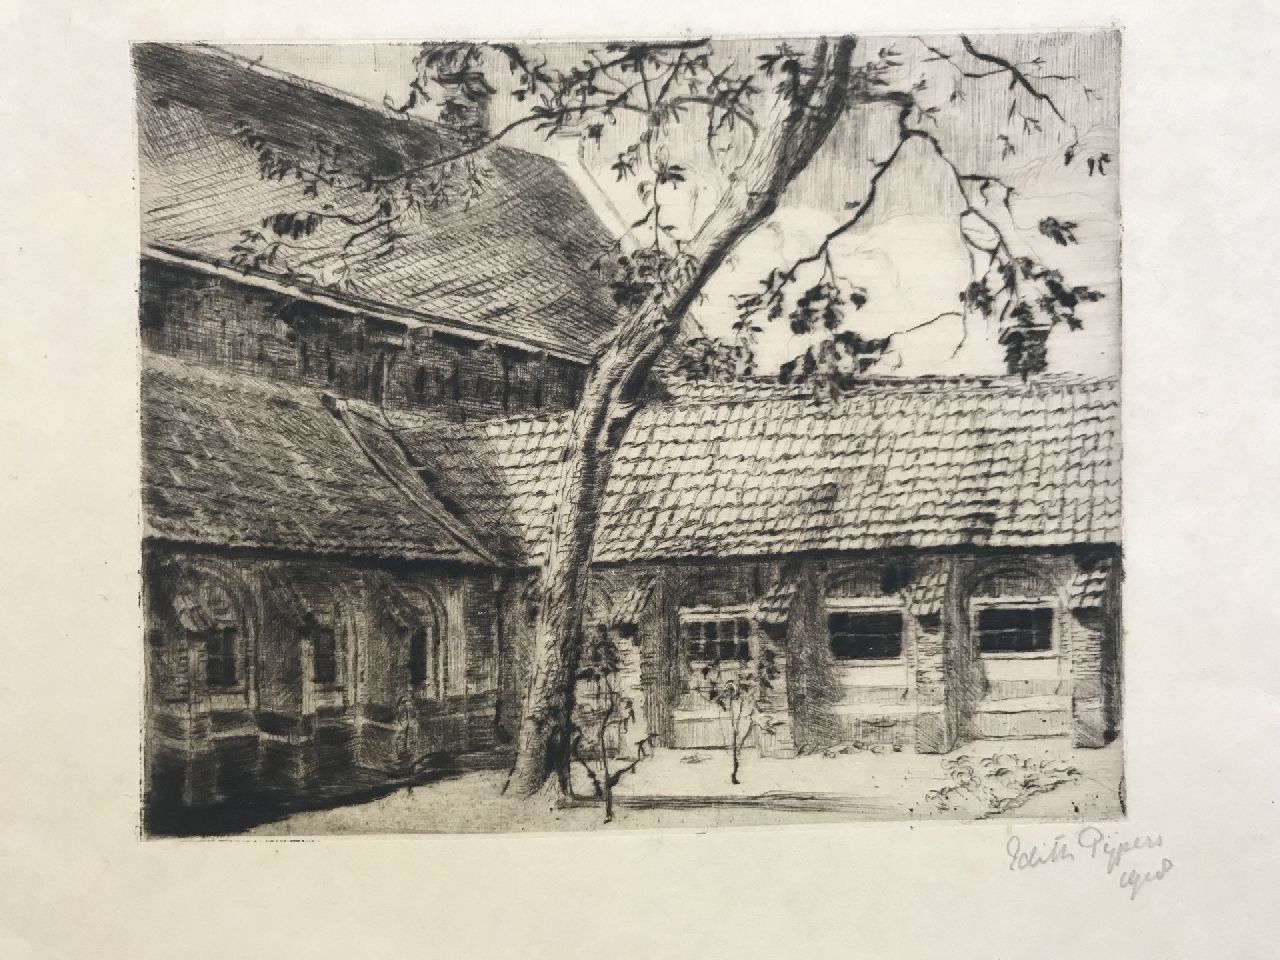 Pijpers E.E.  | 'Edith' Elizabeth Pijpers | Prints and Multiples offered for sale | Cloister, etching on paper 11.9 x 14.8 cm, signed l.r. (in pencil) and dated 1918 (in pencil)